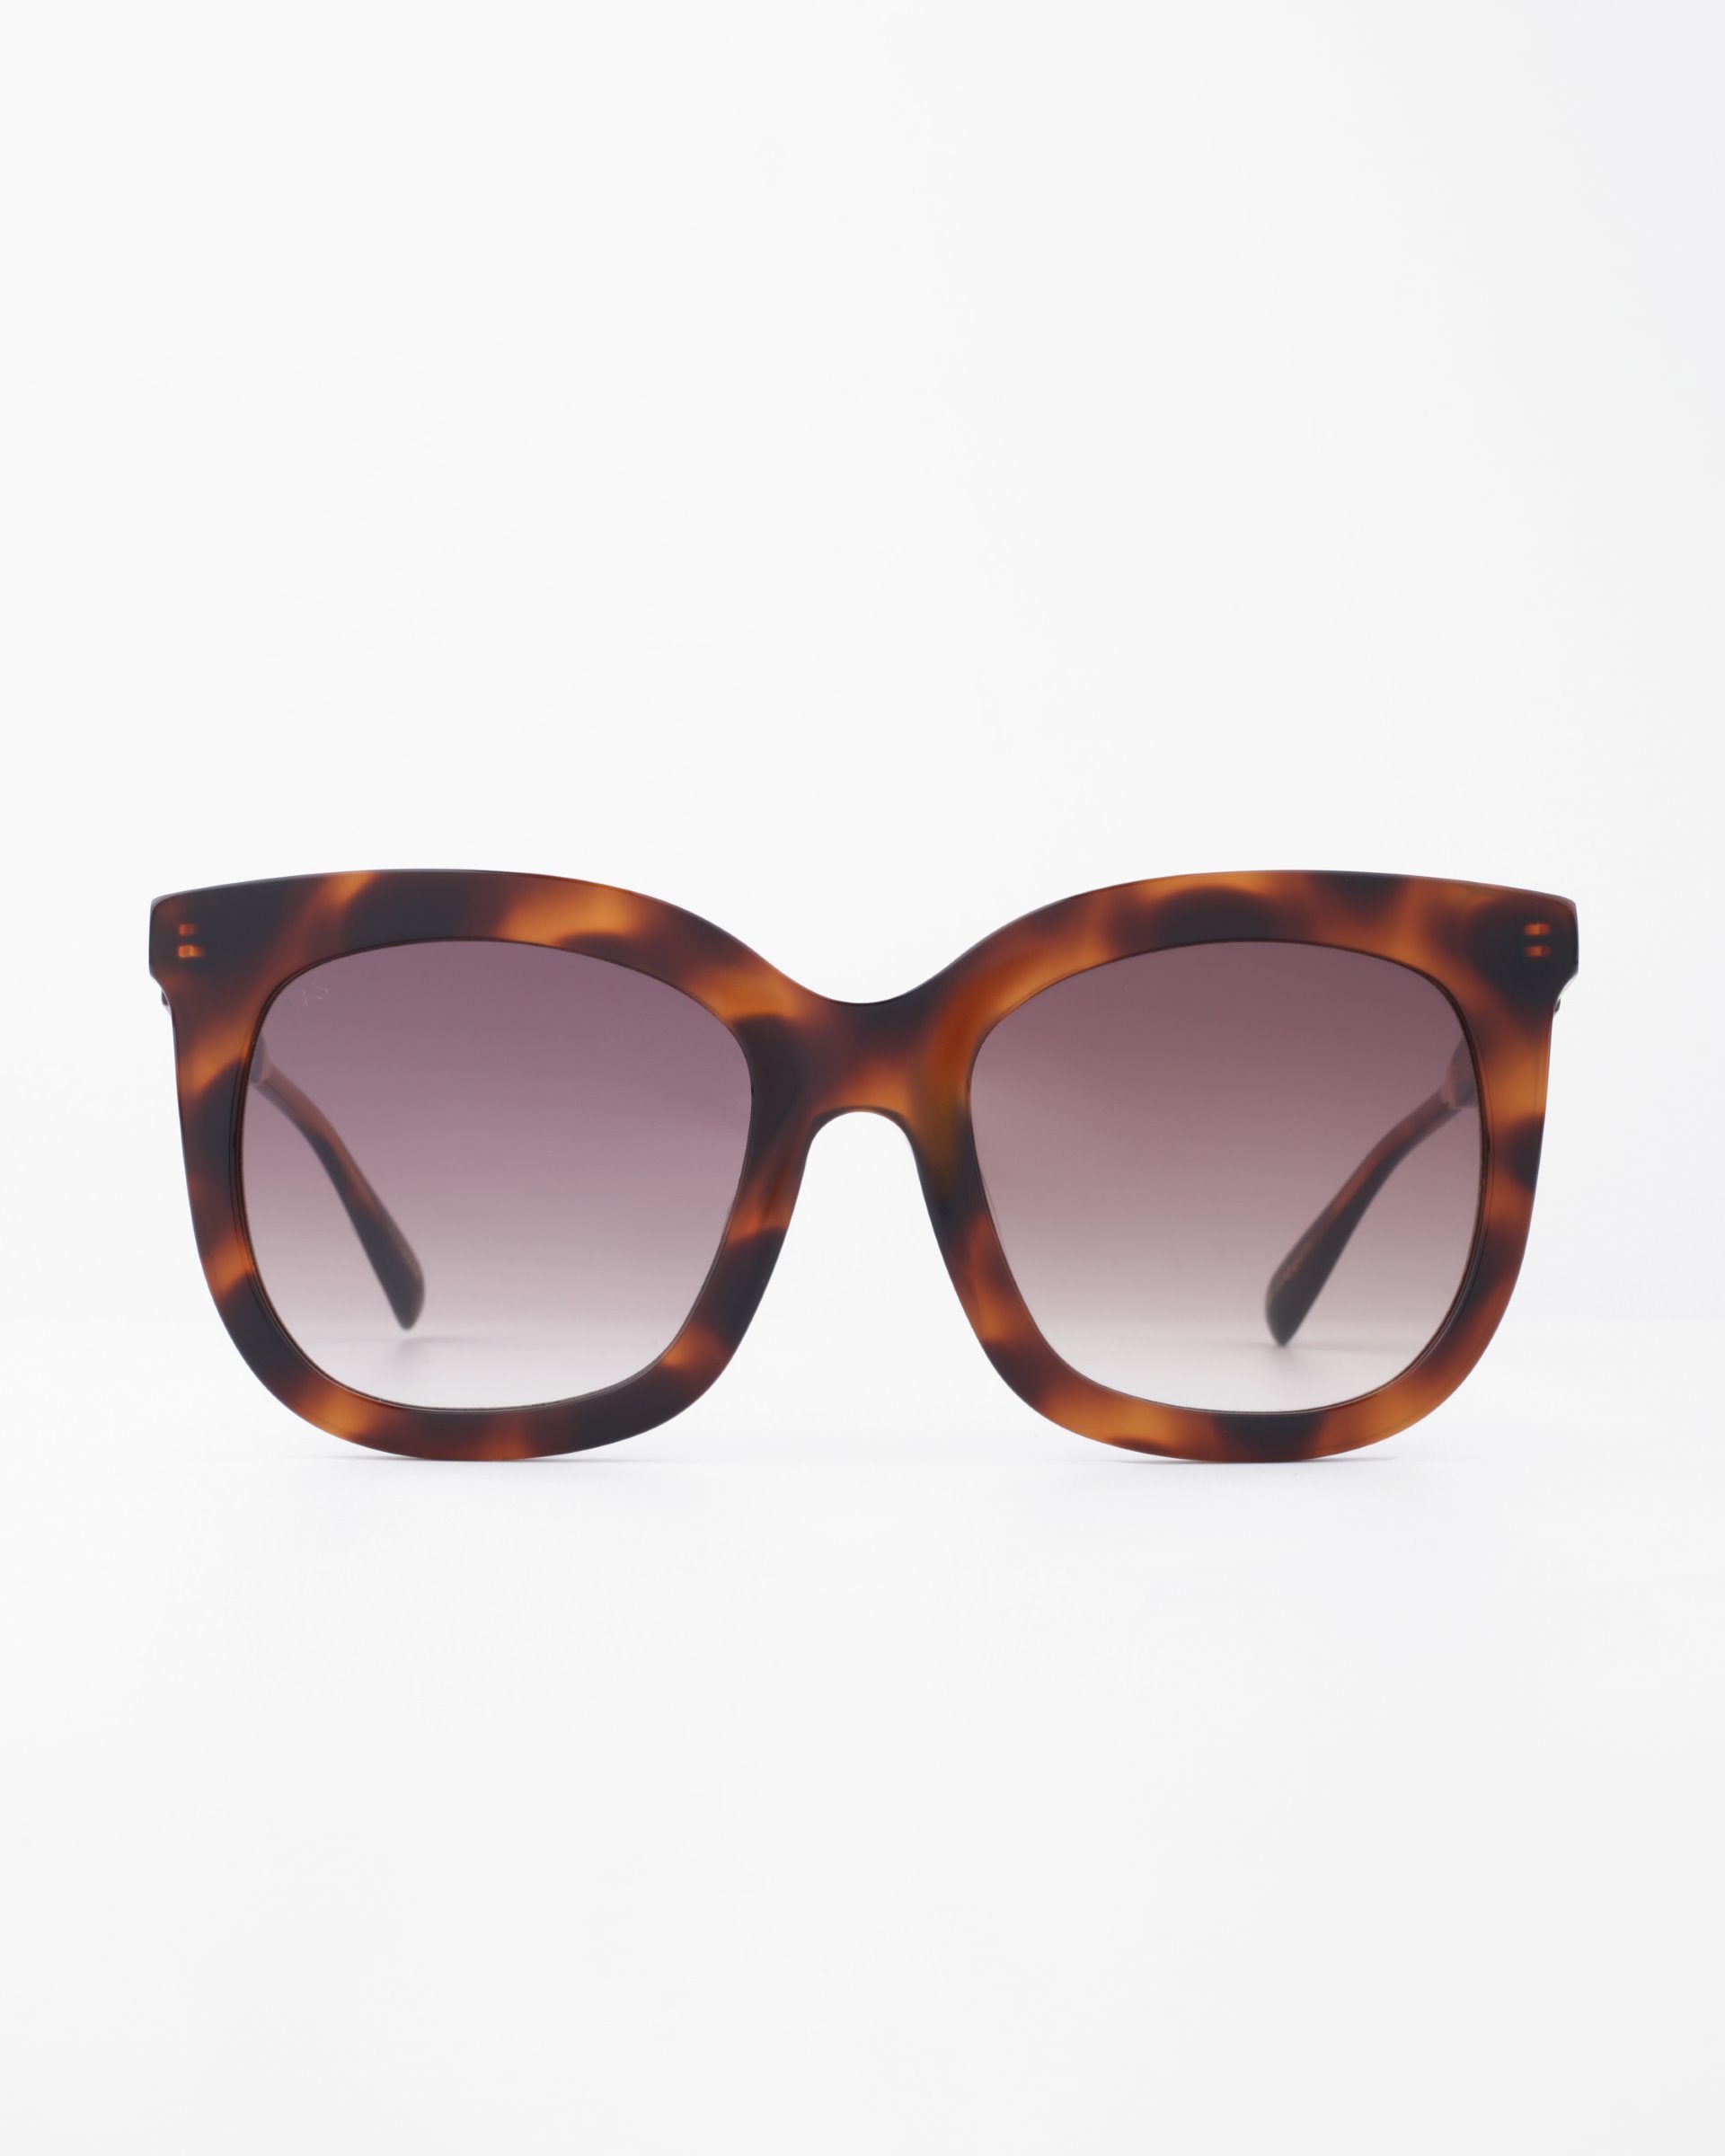 A pair of Riverside by For Art's Sake® sunglasses with a tortoiseshell handmade acetate frame and dark gradient, shatter-resistant lenses. The square-shaped frame has slightly rounded edges with gold-plated detailing. The background is plain white, highlighting the stylish eyewear.